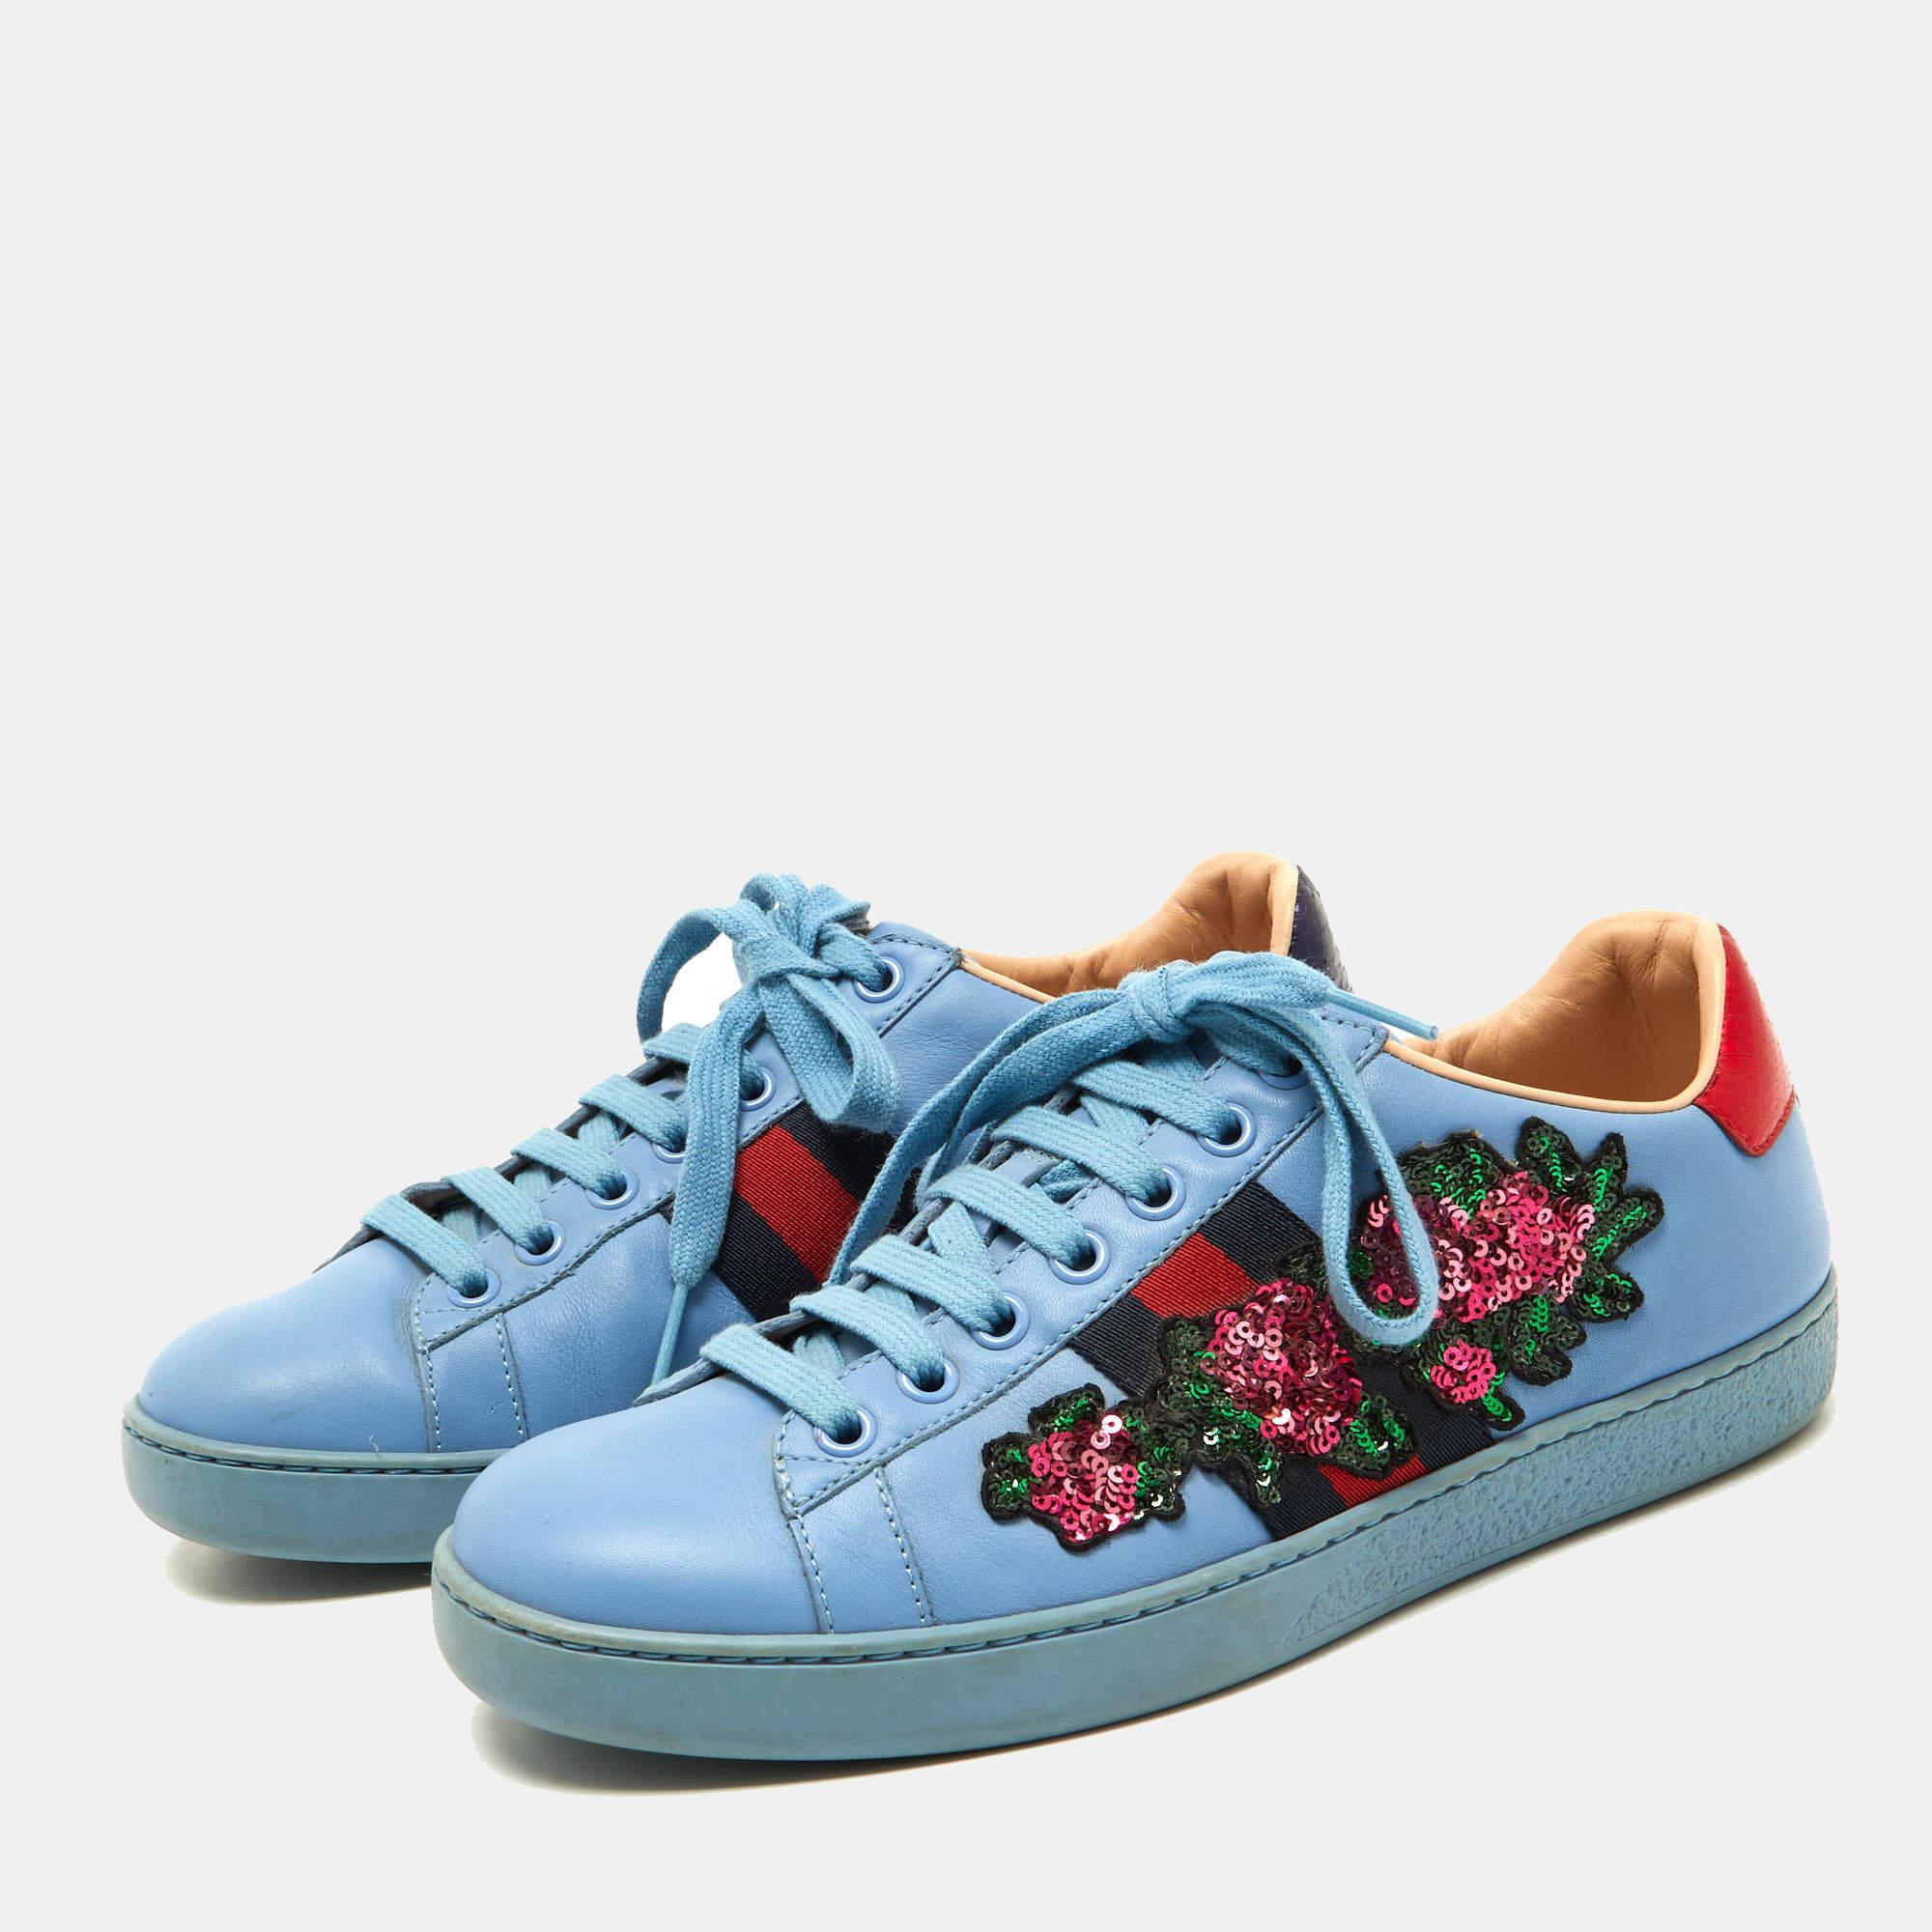 Gucci Blue Leather Flower Sequins Embellished Ace Low Top Sneakers Size 36 In Good Condition For Sale In Dubai, Al Qouz 2